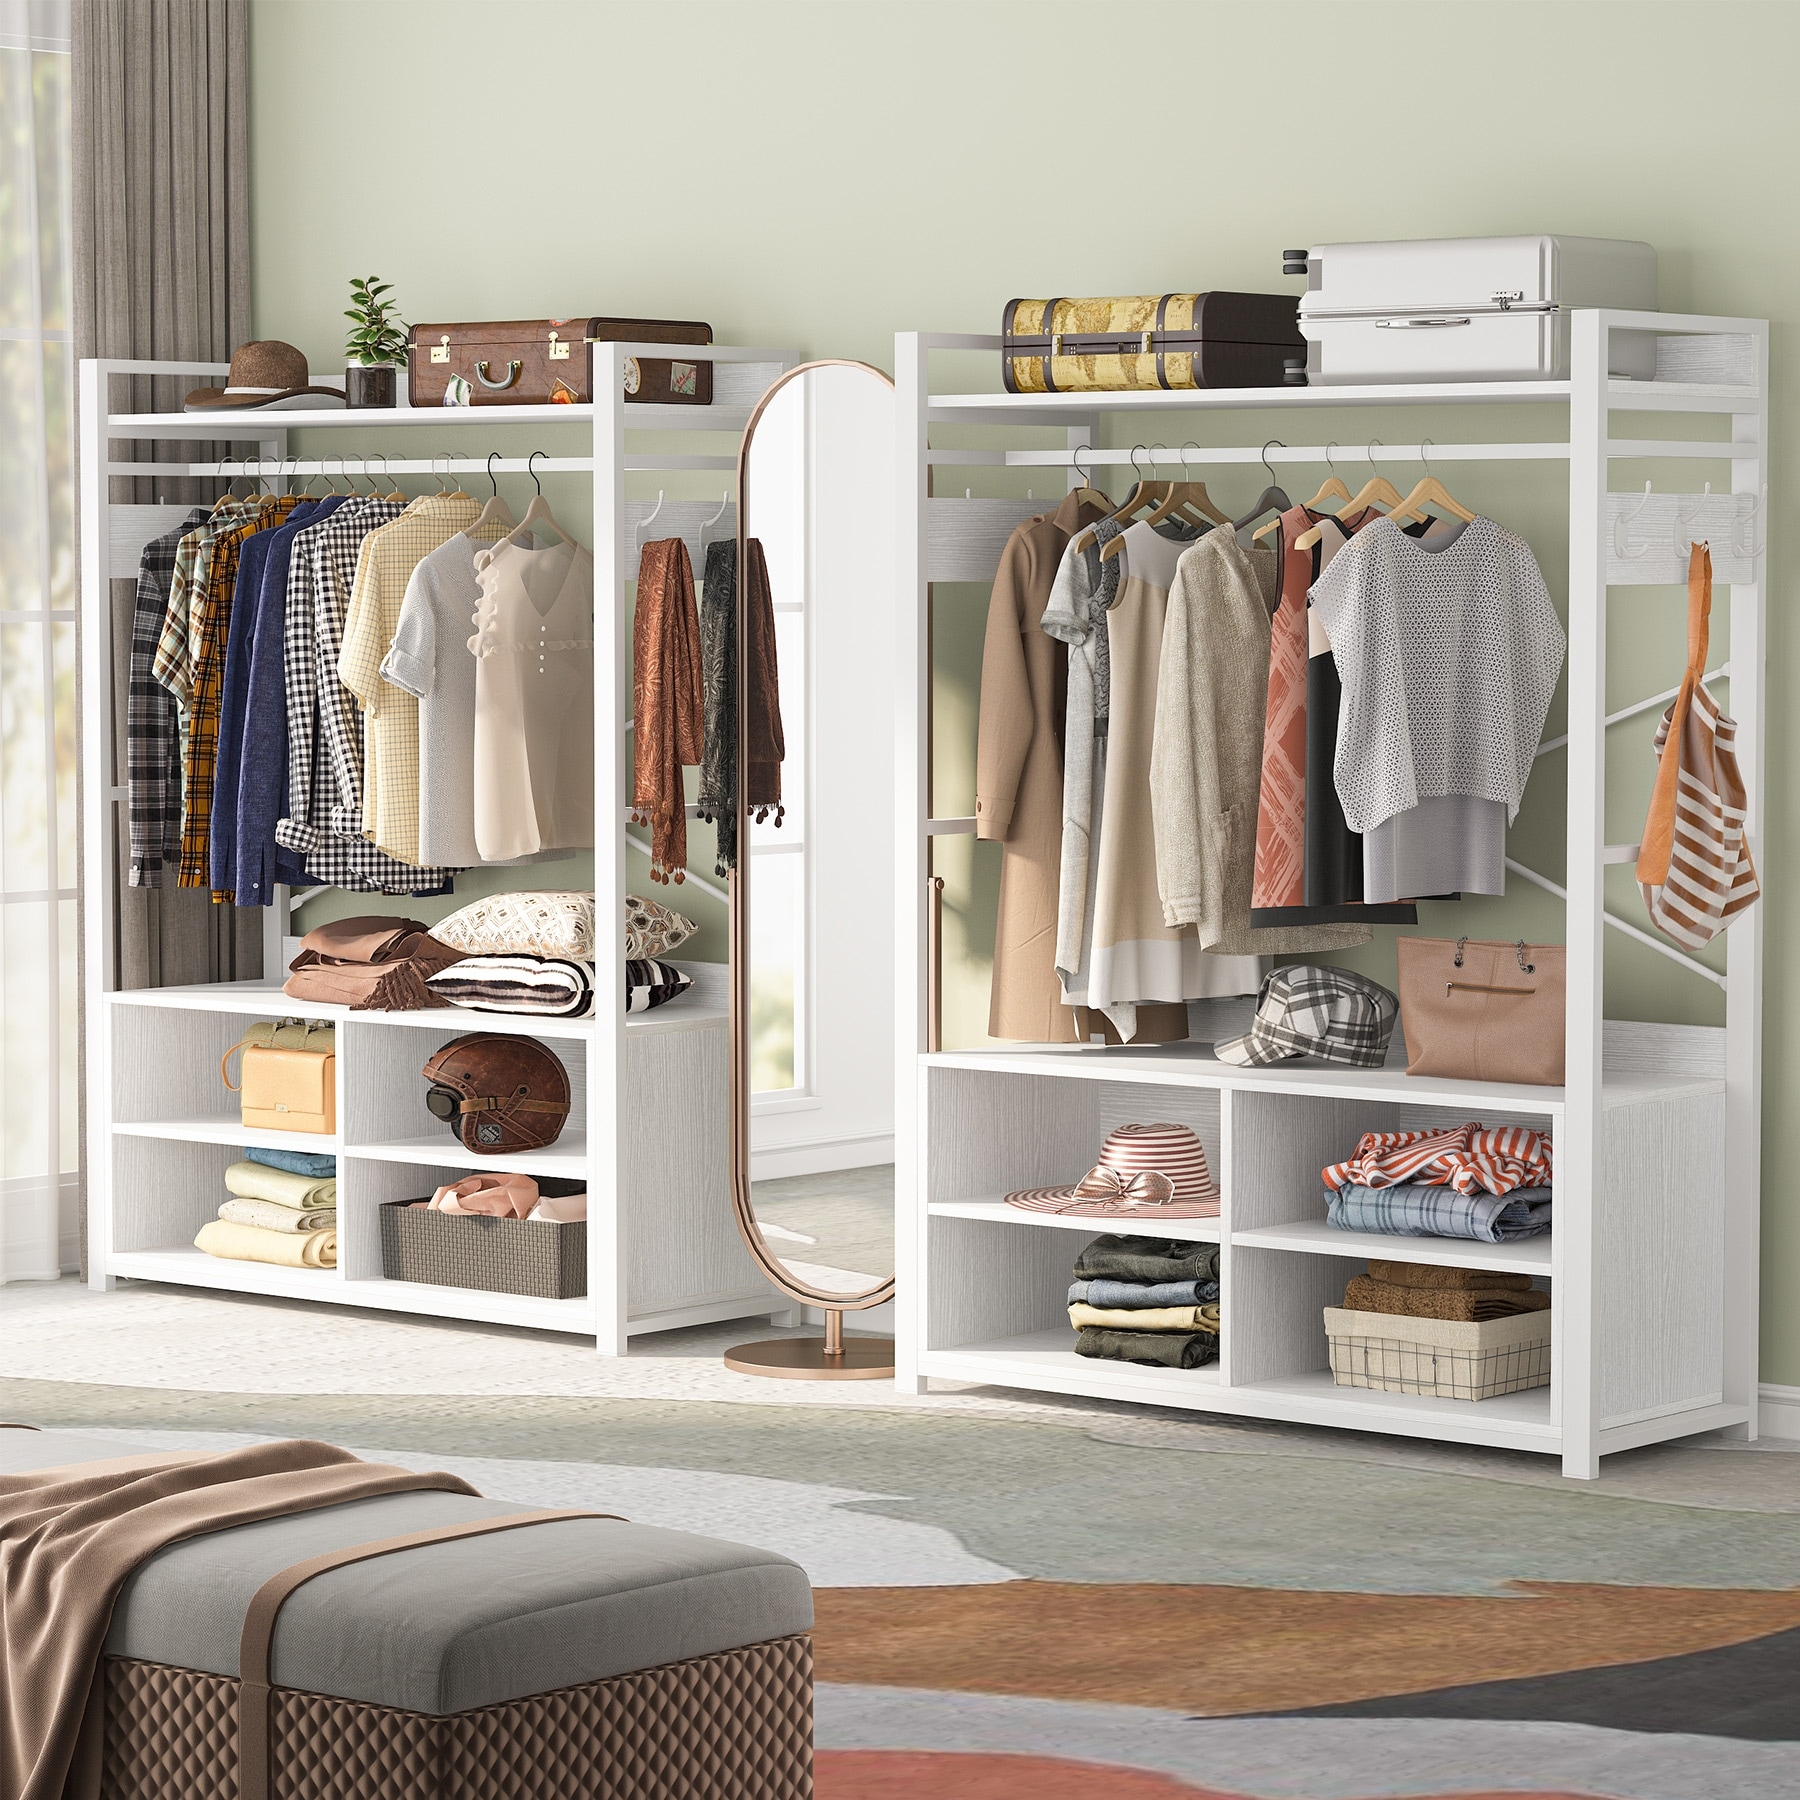 https://ak1.ostkcdn.com/images/products/is/images/direct/1ca80aefc0e5a26a56cb2334cc6b31193a19e380/Metal-Wood-Free-standing-Closet-Clothing-Rack-Closet-Organizer-System-with-Shelves-Clothes-Garment-Rack-Shelving-for-Bedroom.jpg